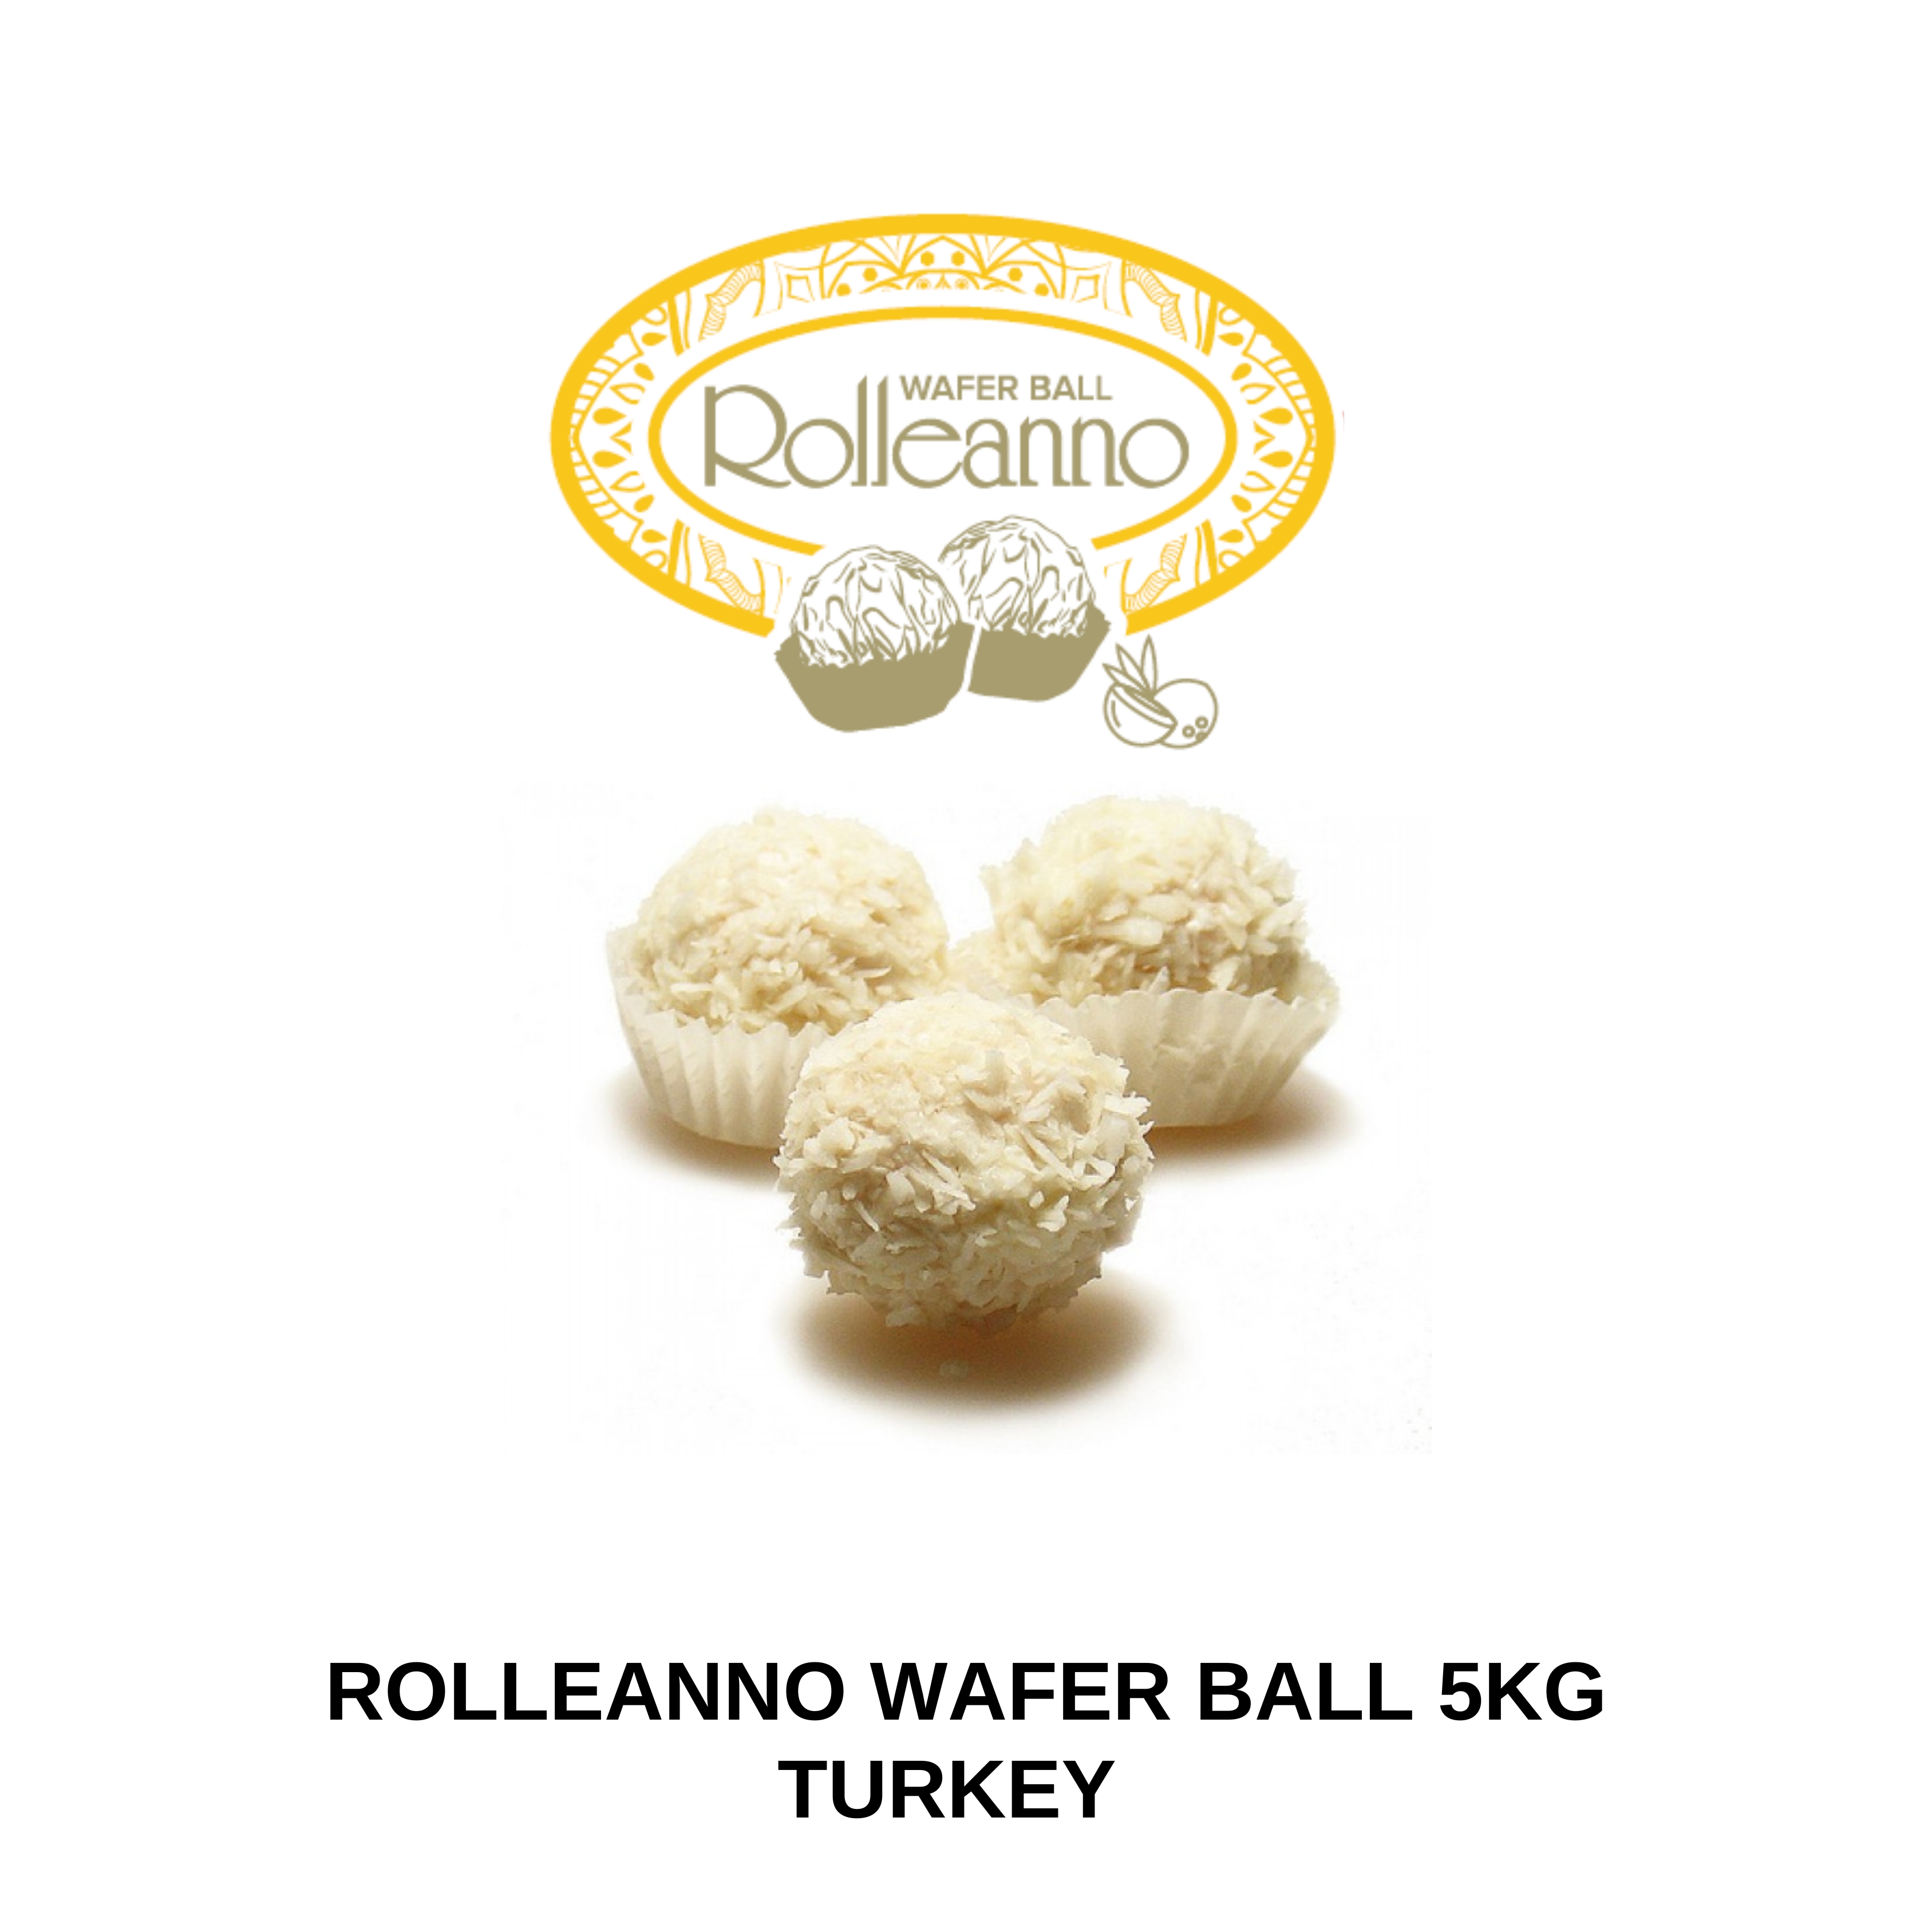 Rolleanno Wafer Ball